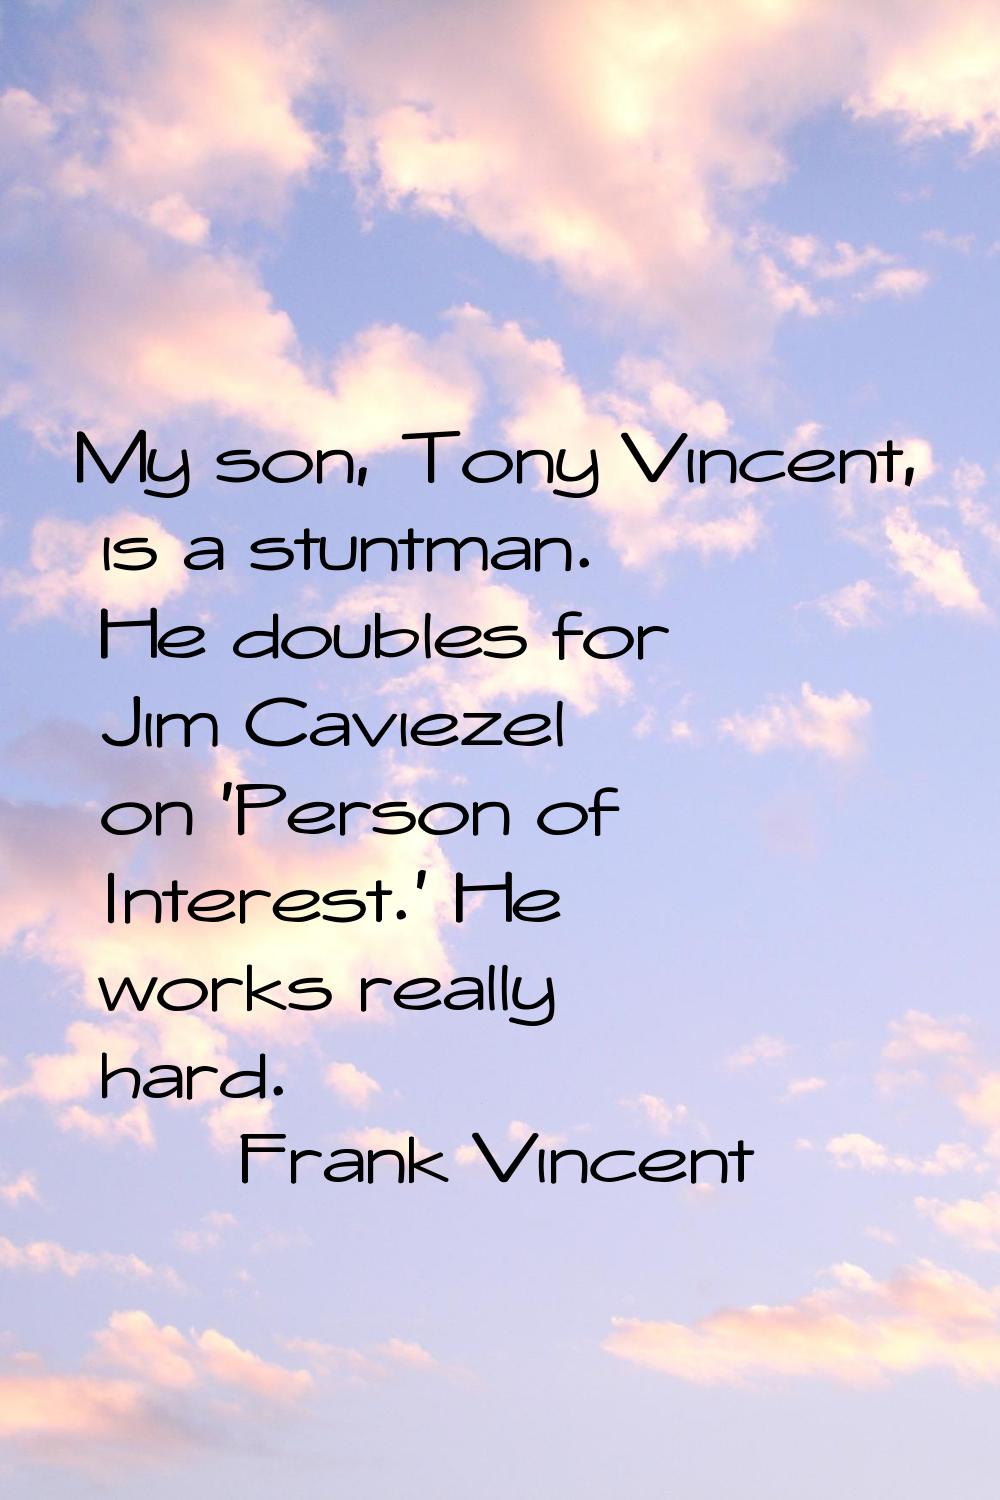 My son, Tony Vincent, is a stuntman. He doubles for Jim Caviezel on 'Person of Interest.' He works 